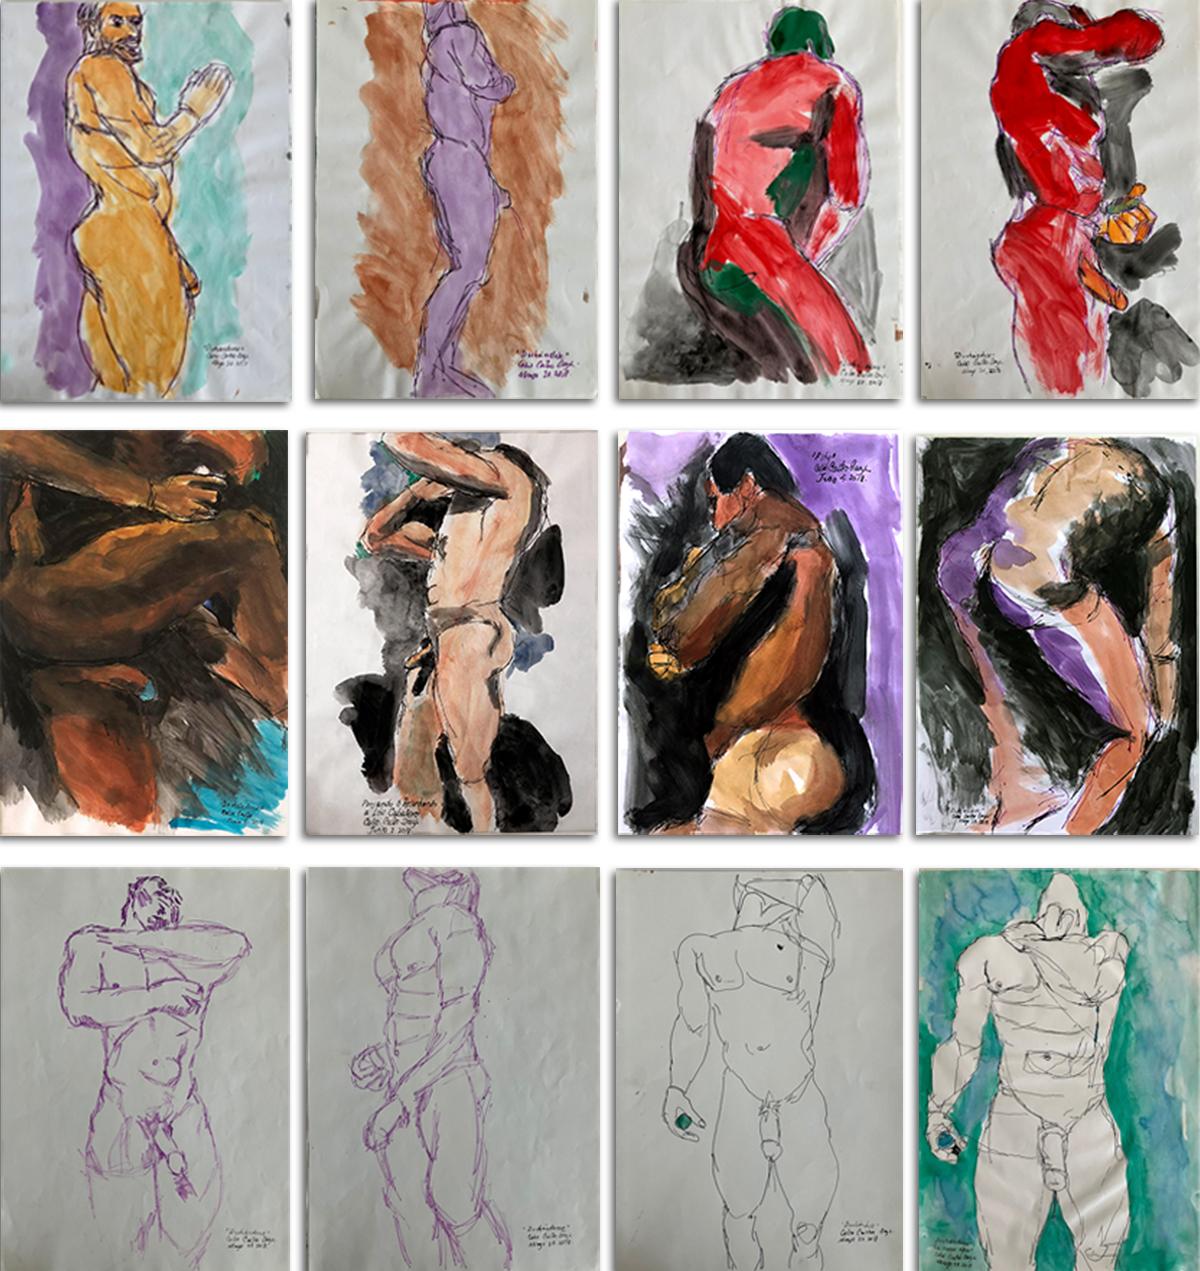 From the Duchándome Nude, Series. Set of 12 Watercolors & Ink on archival paper - Art by Celso José Castro Daza